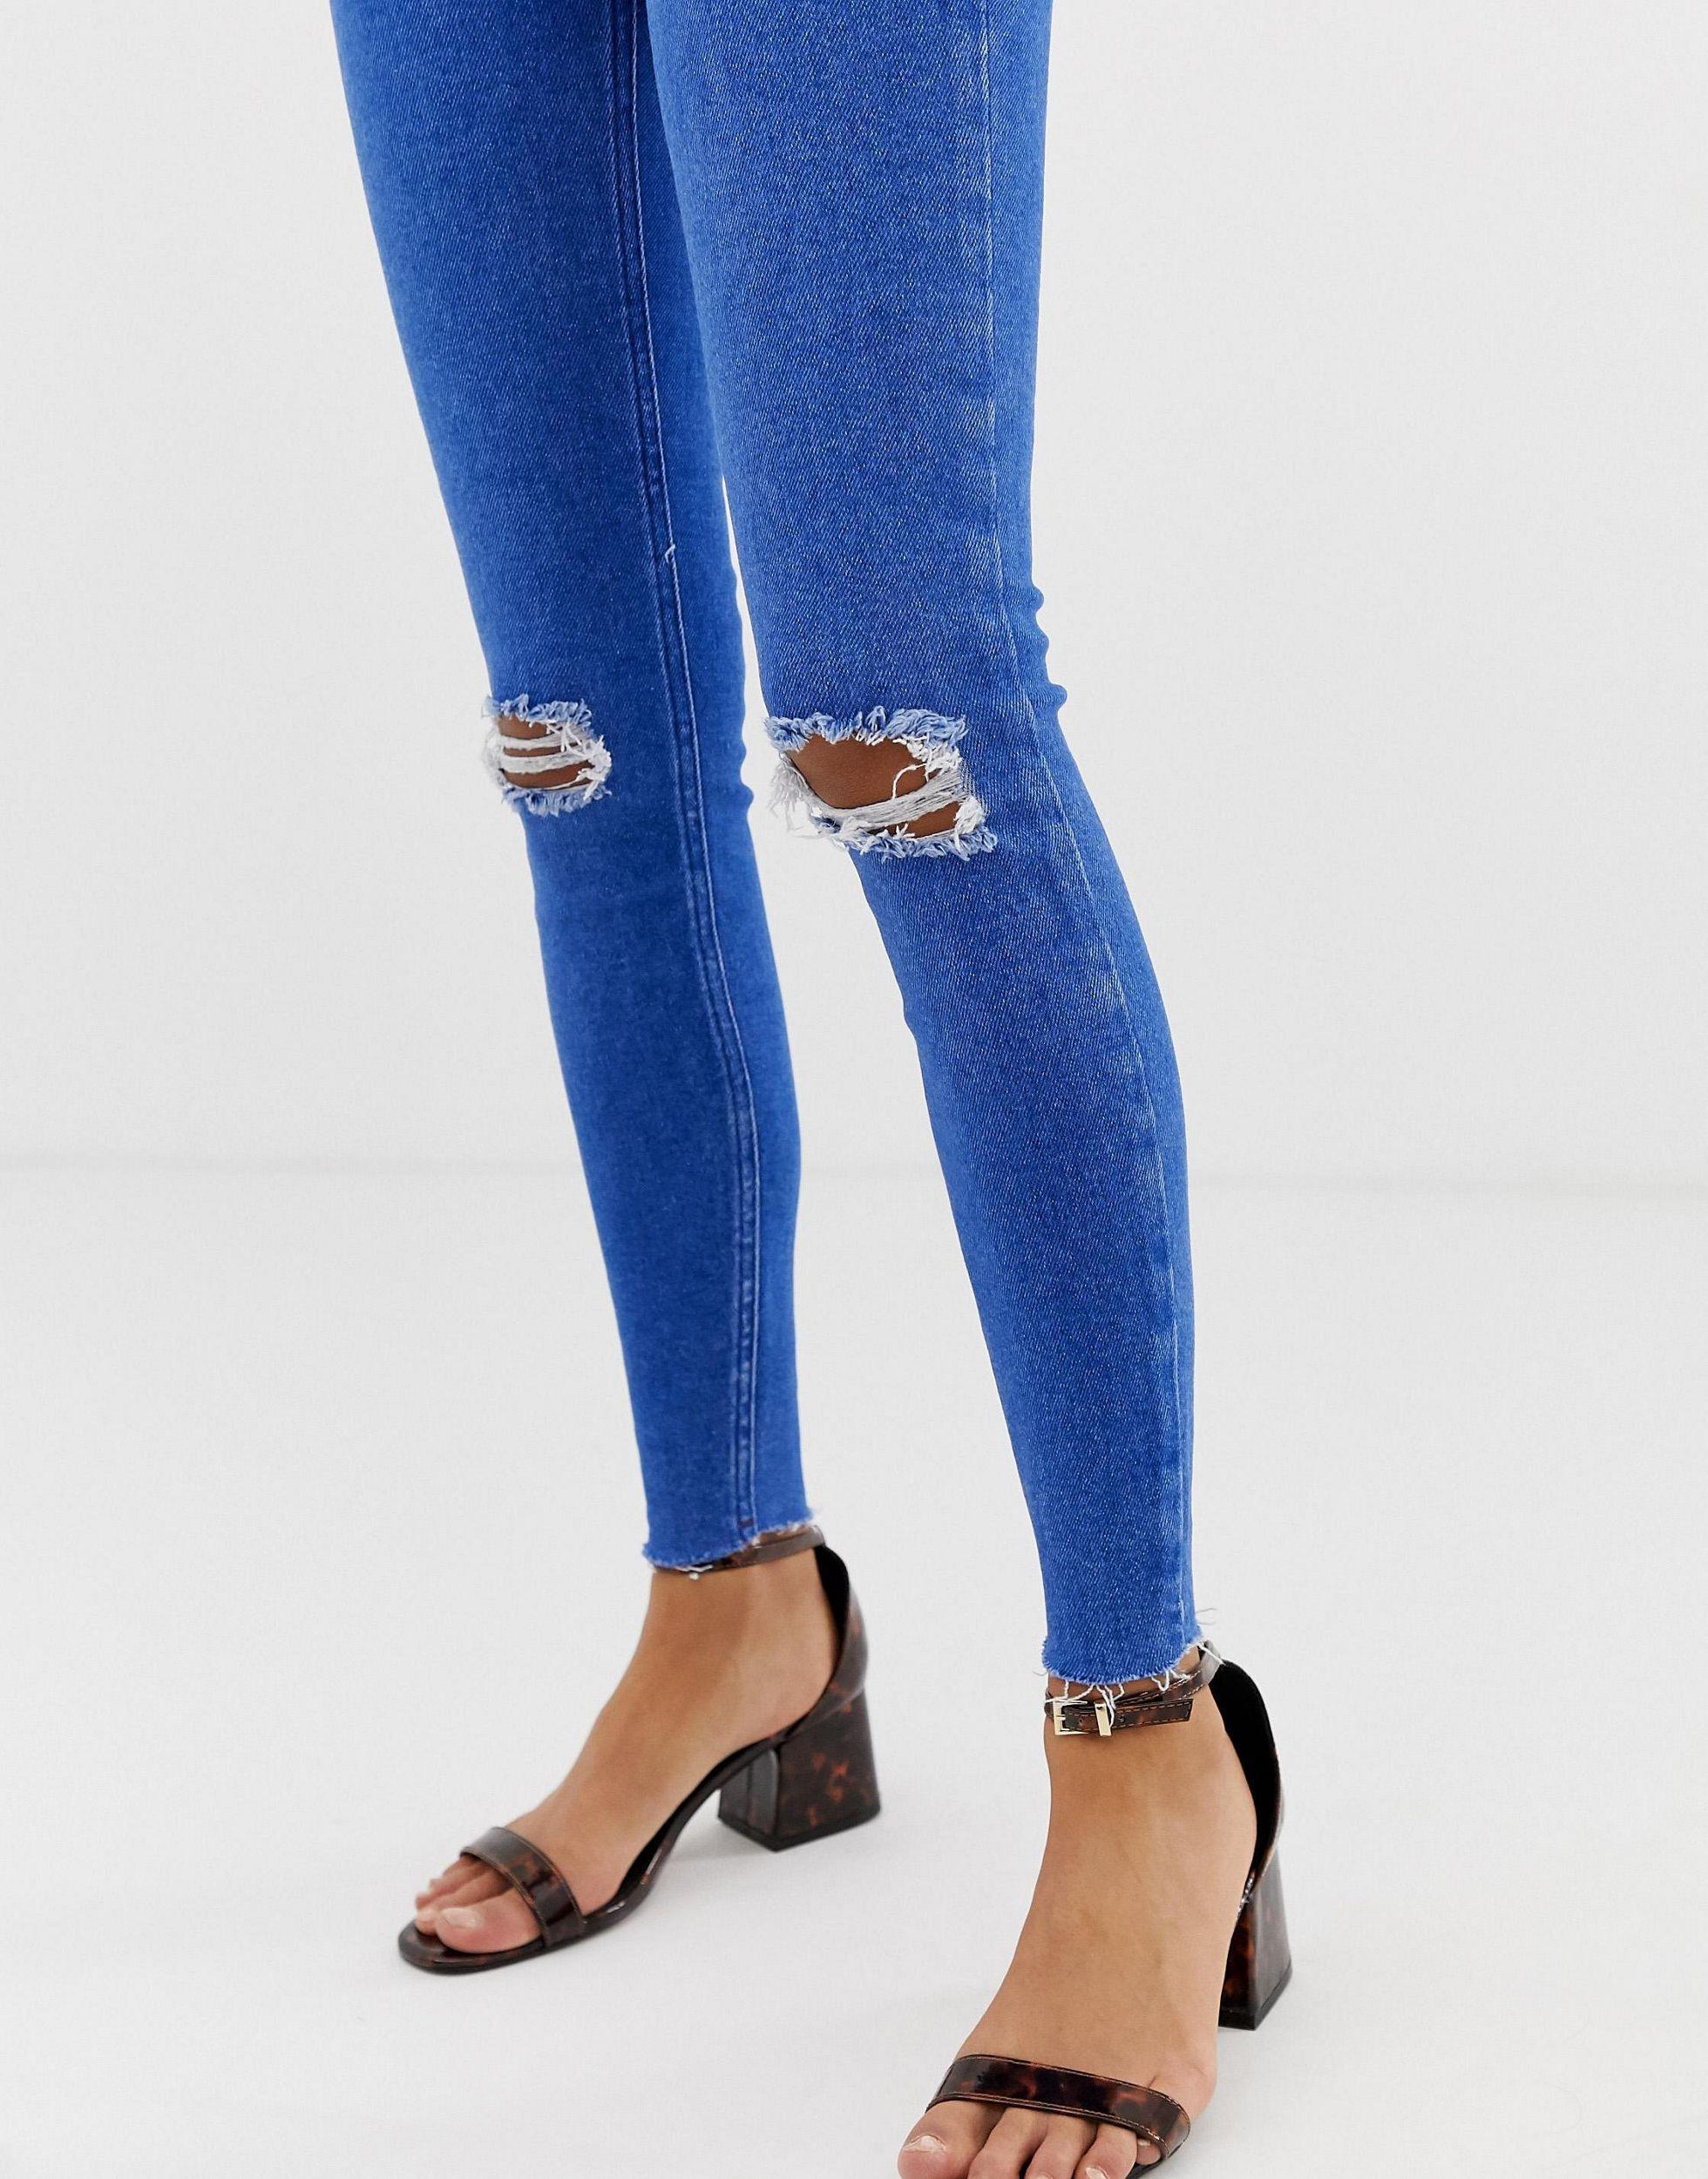 New Look Hallie Disco High Rise Ripped Jeans | islamiyyat.com